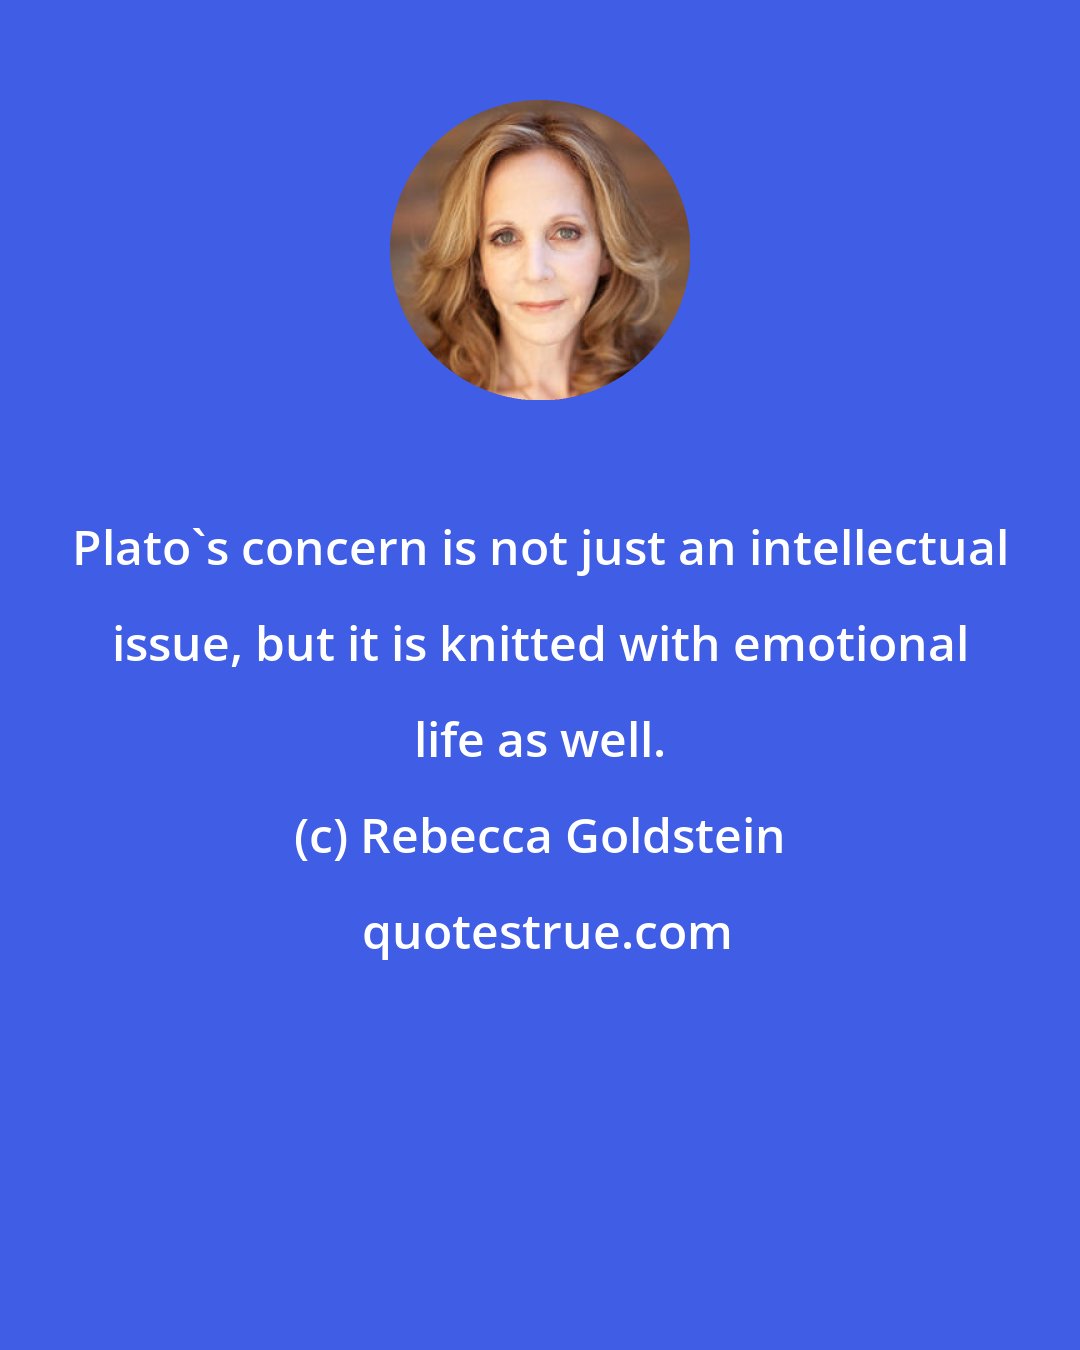 Rebecca Goldstein: Plato's concern is not just an intellectual issue, but it is knitted with emotional life as well.